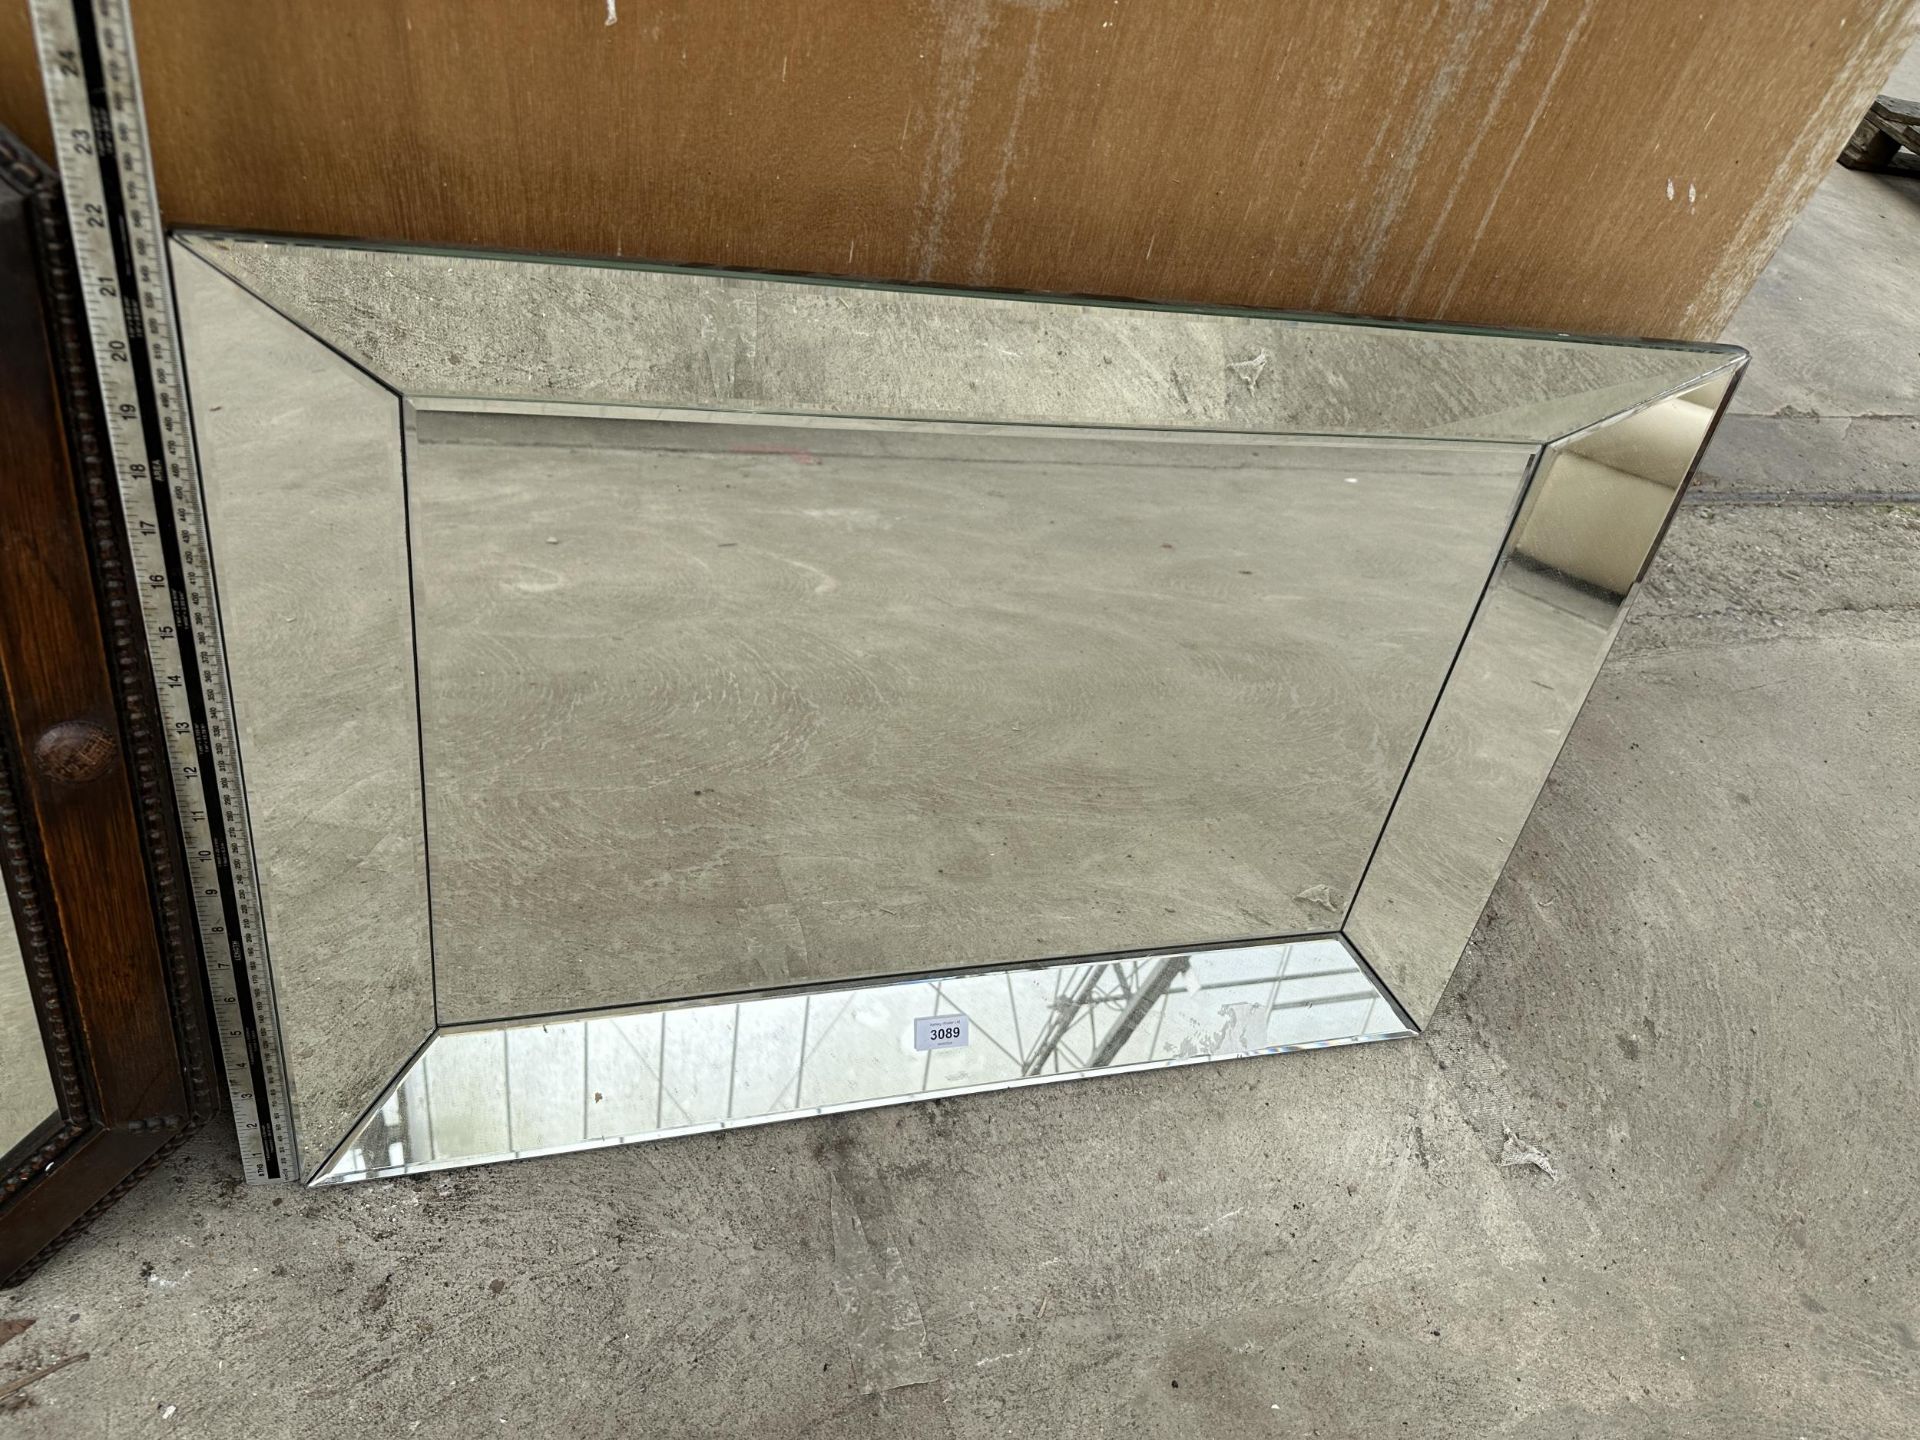 A BEVEL EDGE WALL MIRROR WITH ANGLED SIDE MIRRORS, 31" X 22"